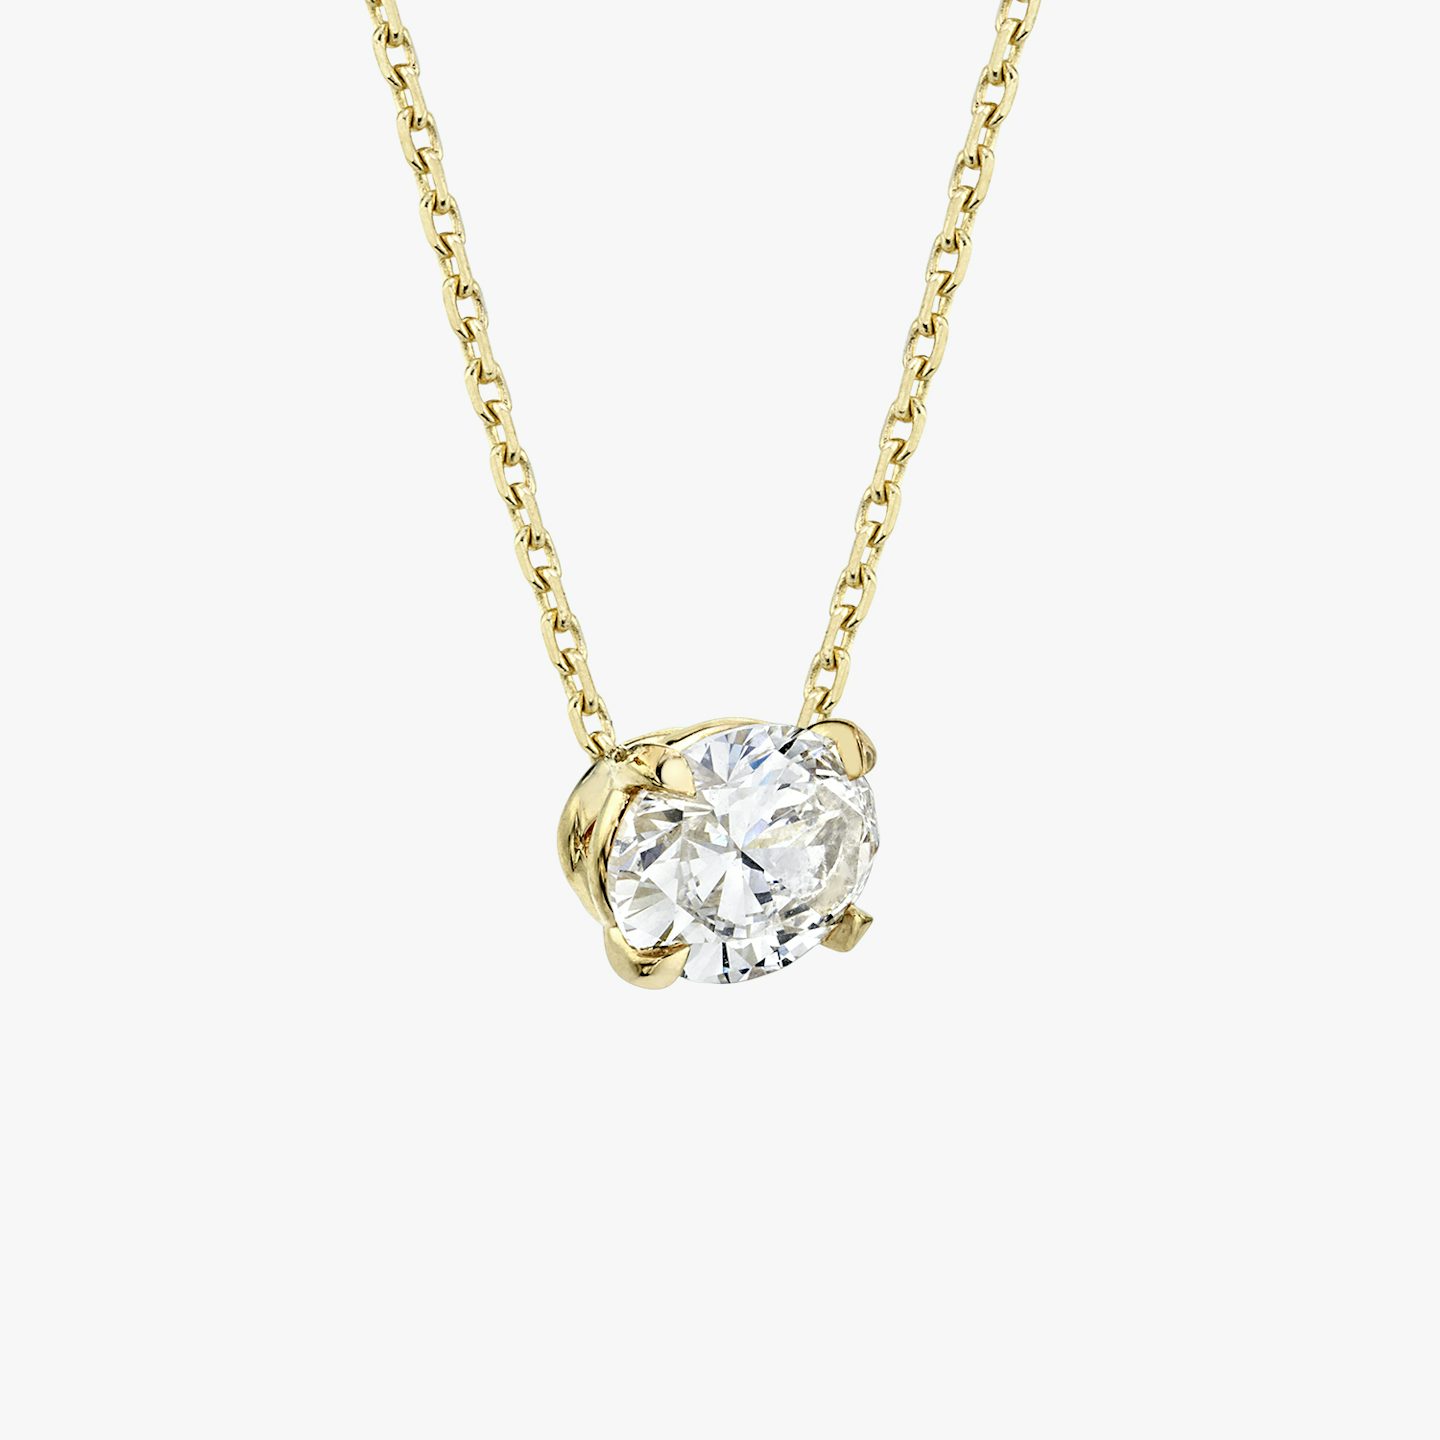 VRAI Solitaire Necklace | Oval | 14k | Yellow Gold | caratWeight: other